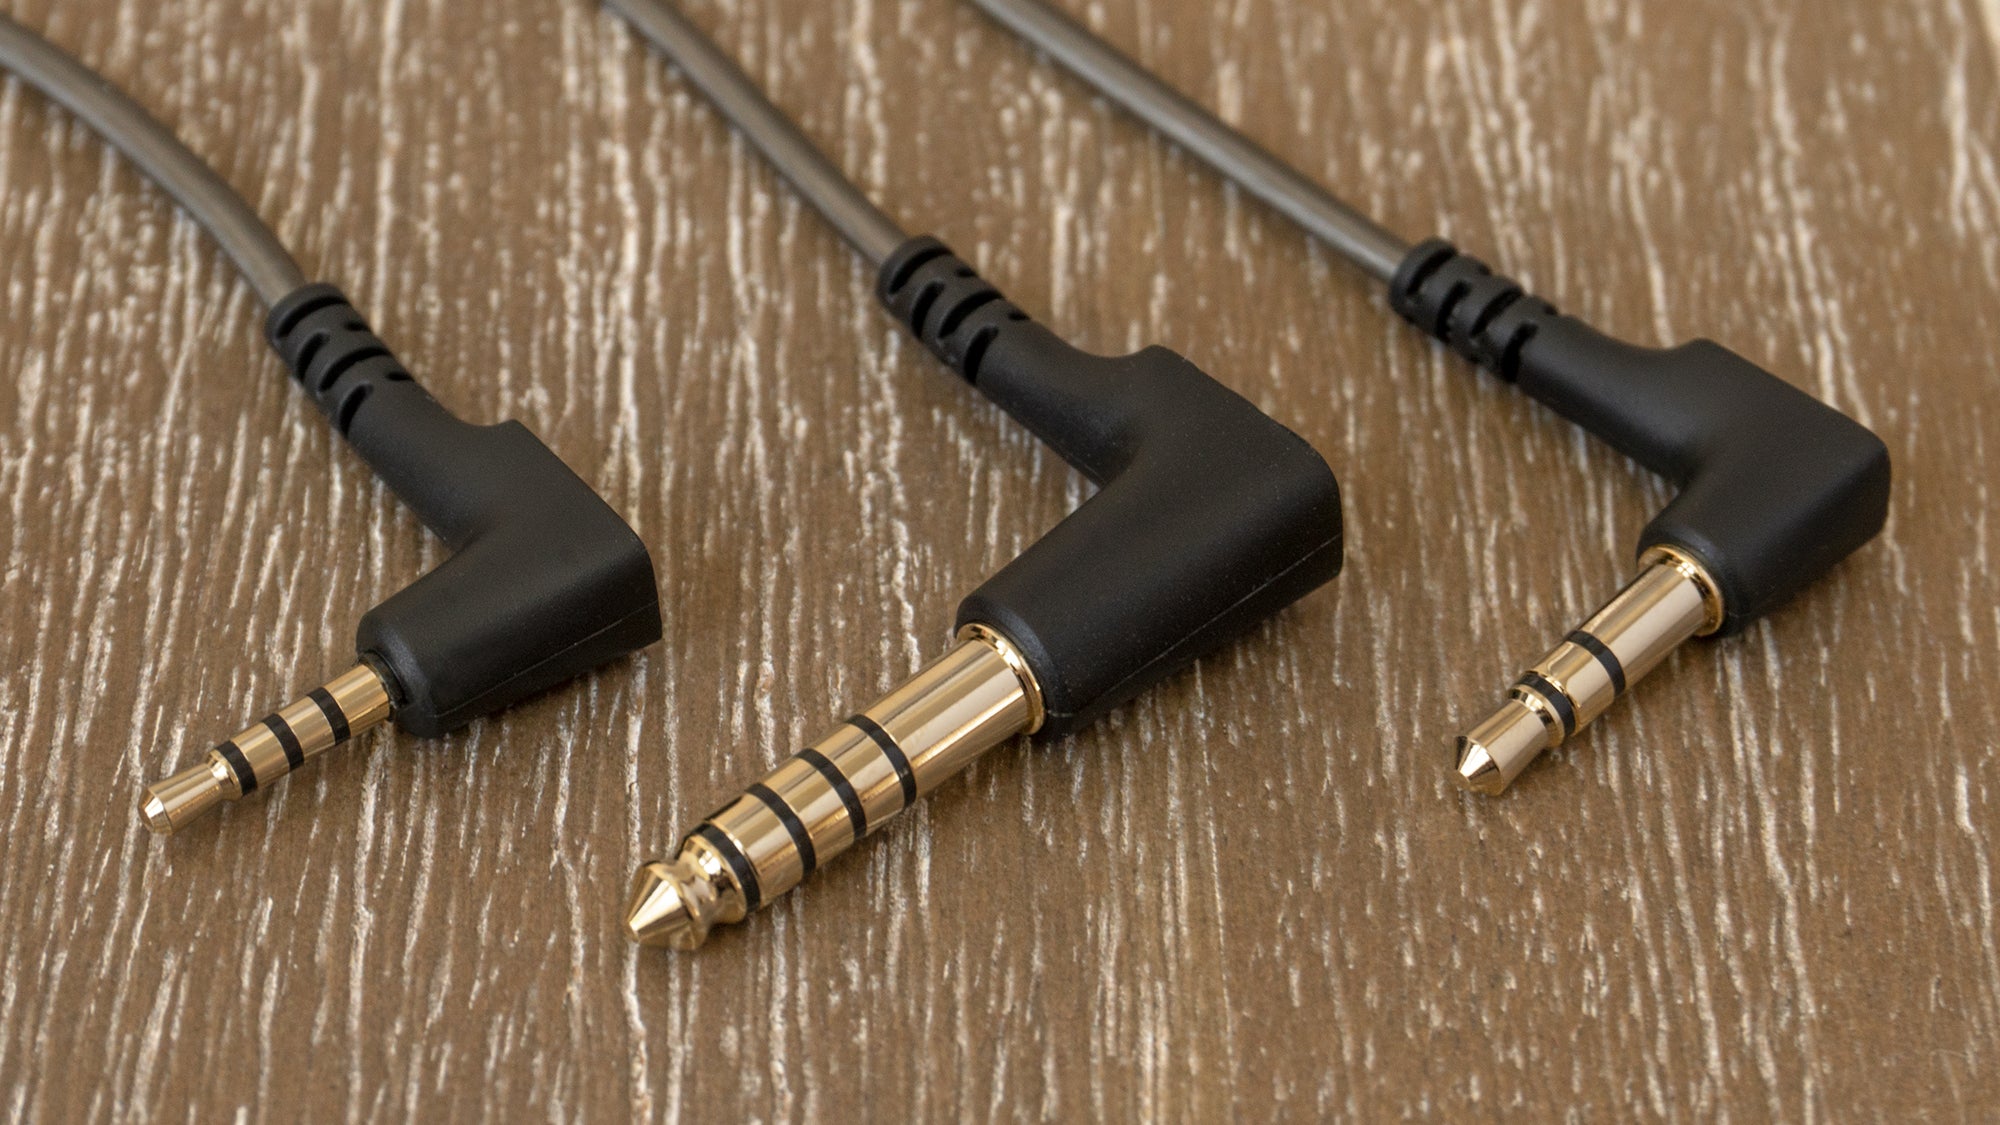 Sennheiser includes three cables with the IE 900s, one with a standard unbalanced 3.5mm connector, and two larger options that provide a balanced connection for eliminating unwanted audio hum. (Photo: Andrew Liszewski/Gizmodo)